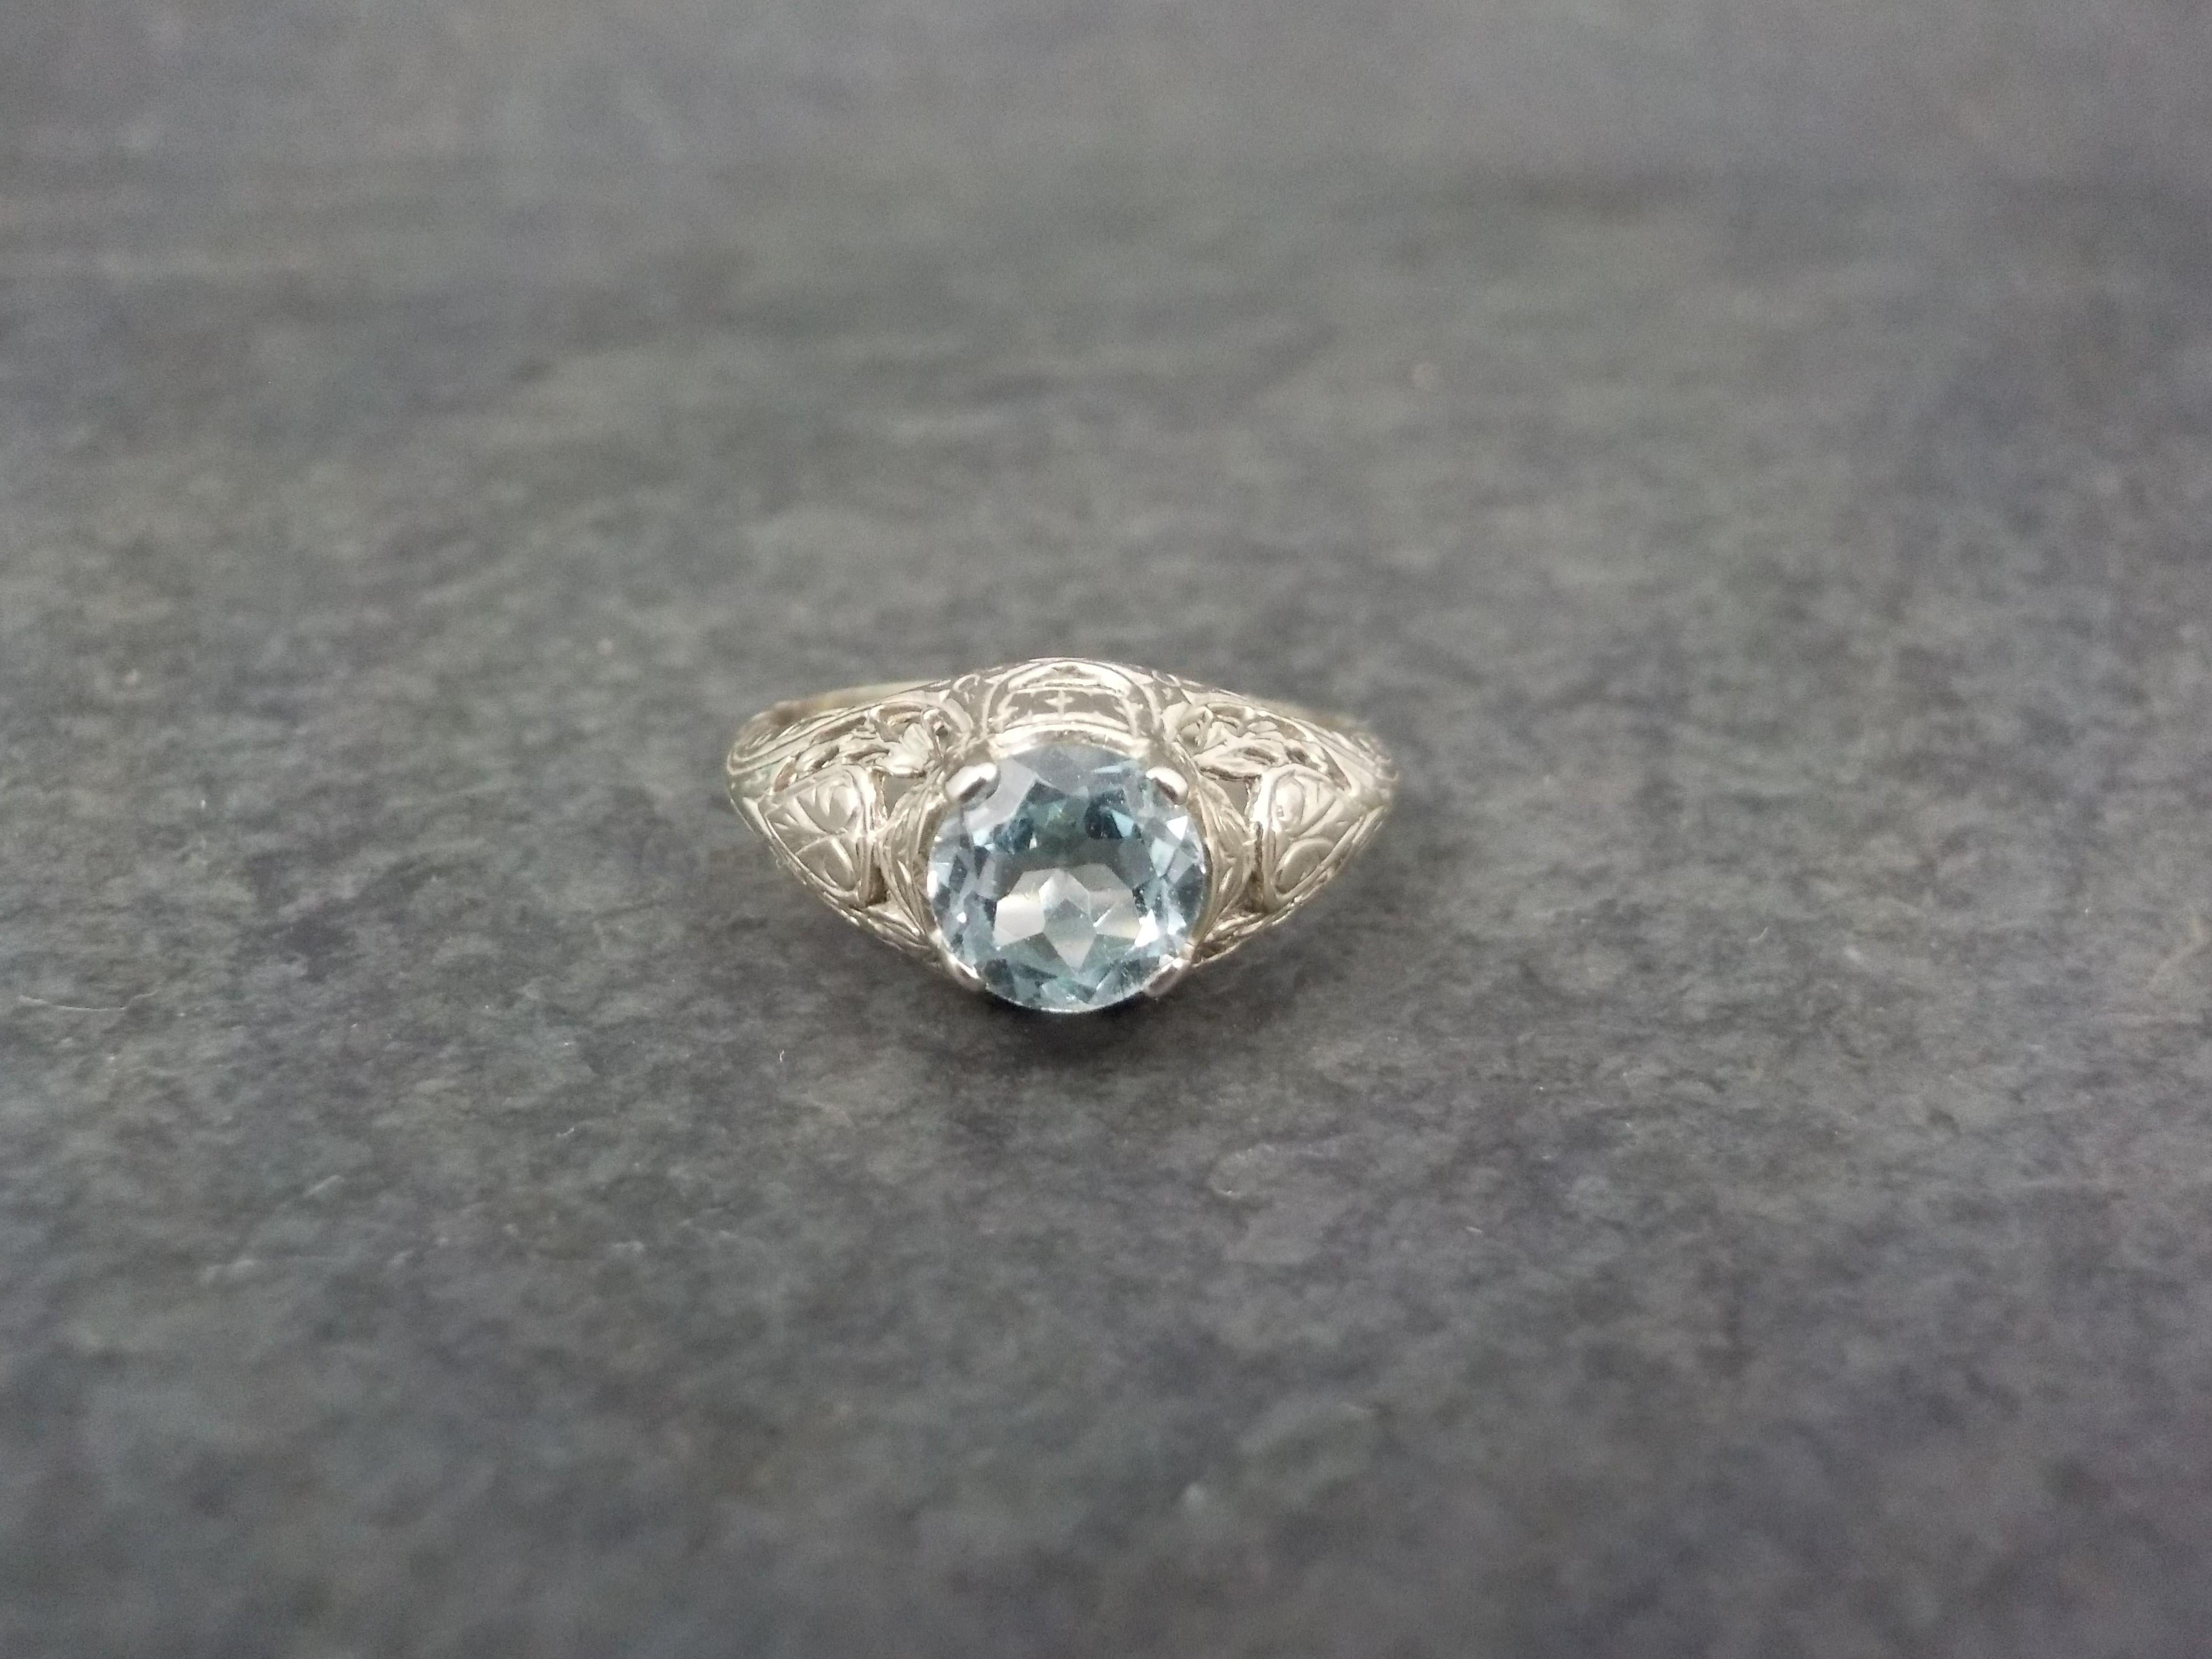 This gorgeous Art Deco ring is 14k white gold.
It features a delicate filigree design with a 6mm blue topaz gemstone.
The face of this ring measures 5/16 of an inch north to south with a rise of 6mm off the finger.
Size: 5
Marks: 14K
Condition: